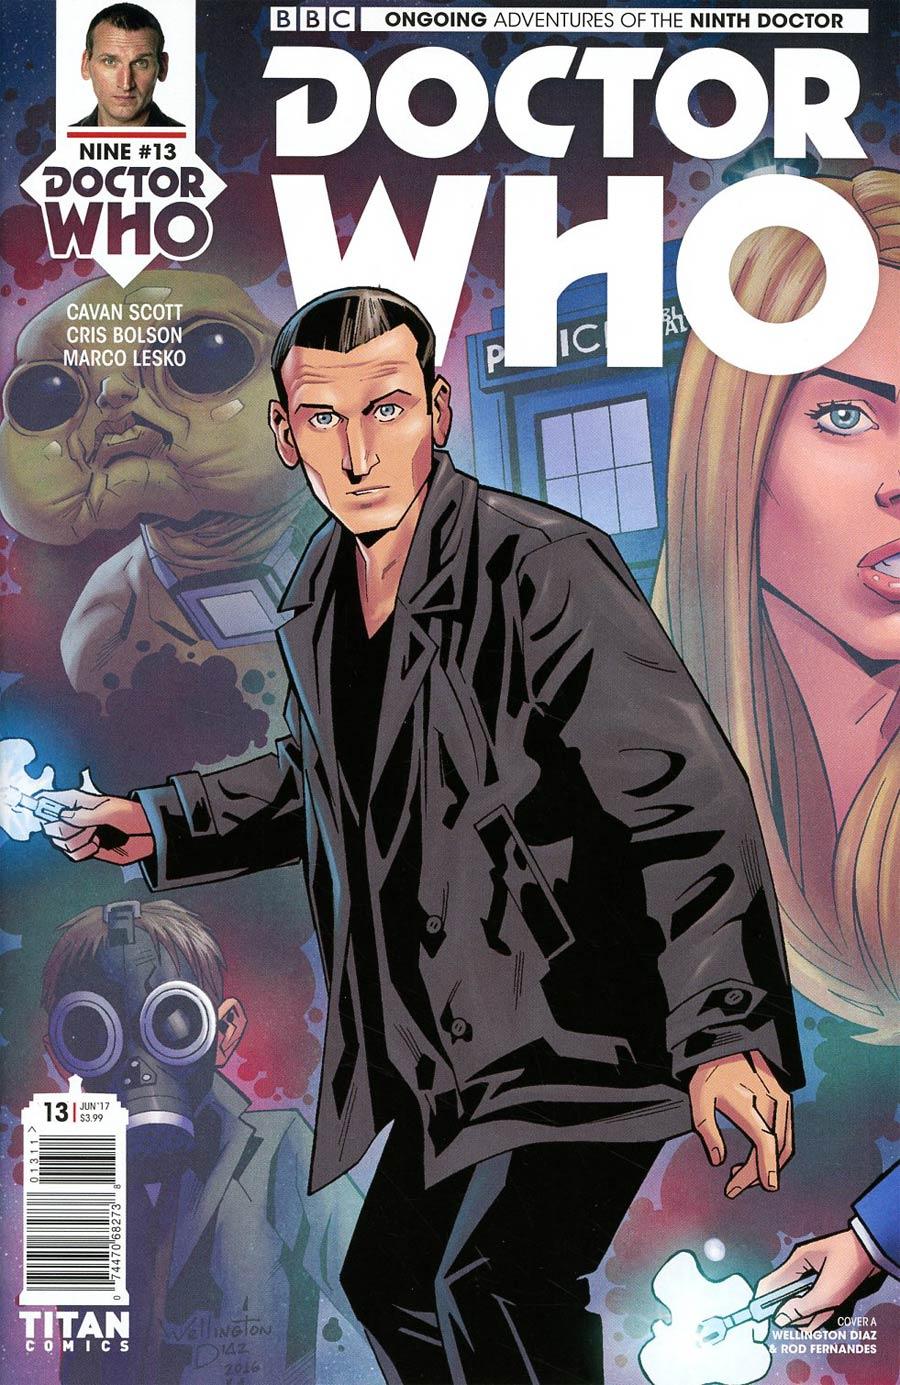 Doctor Who 9th Doctor Vol. 2 #13